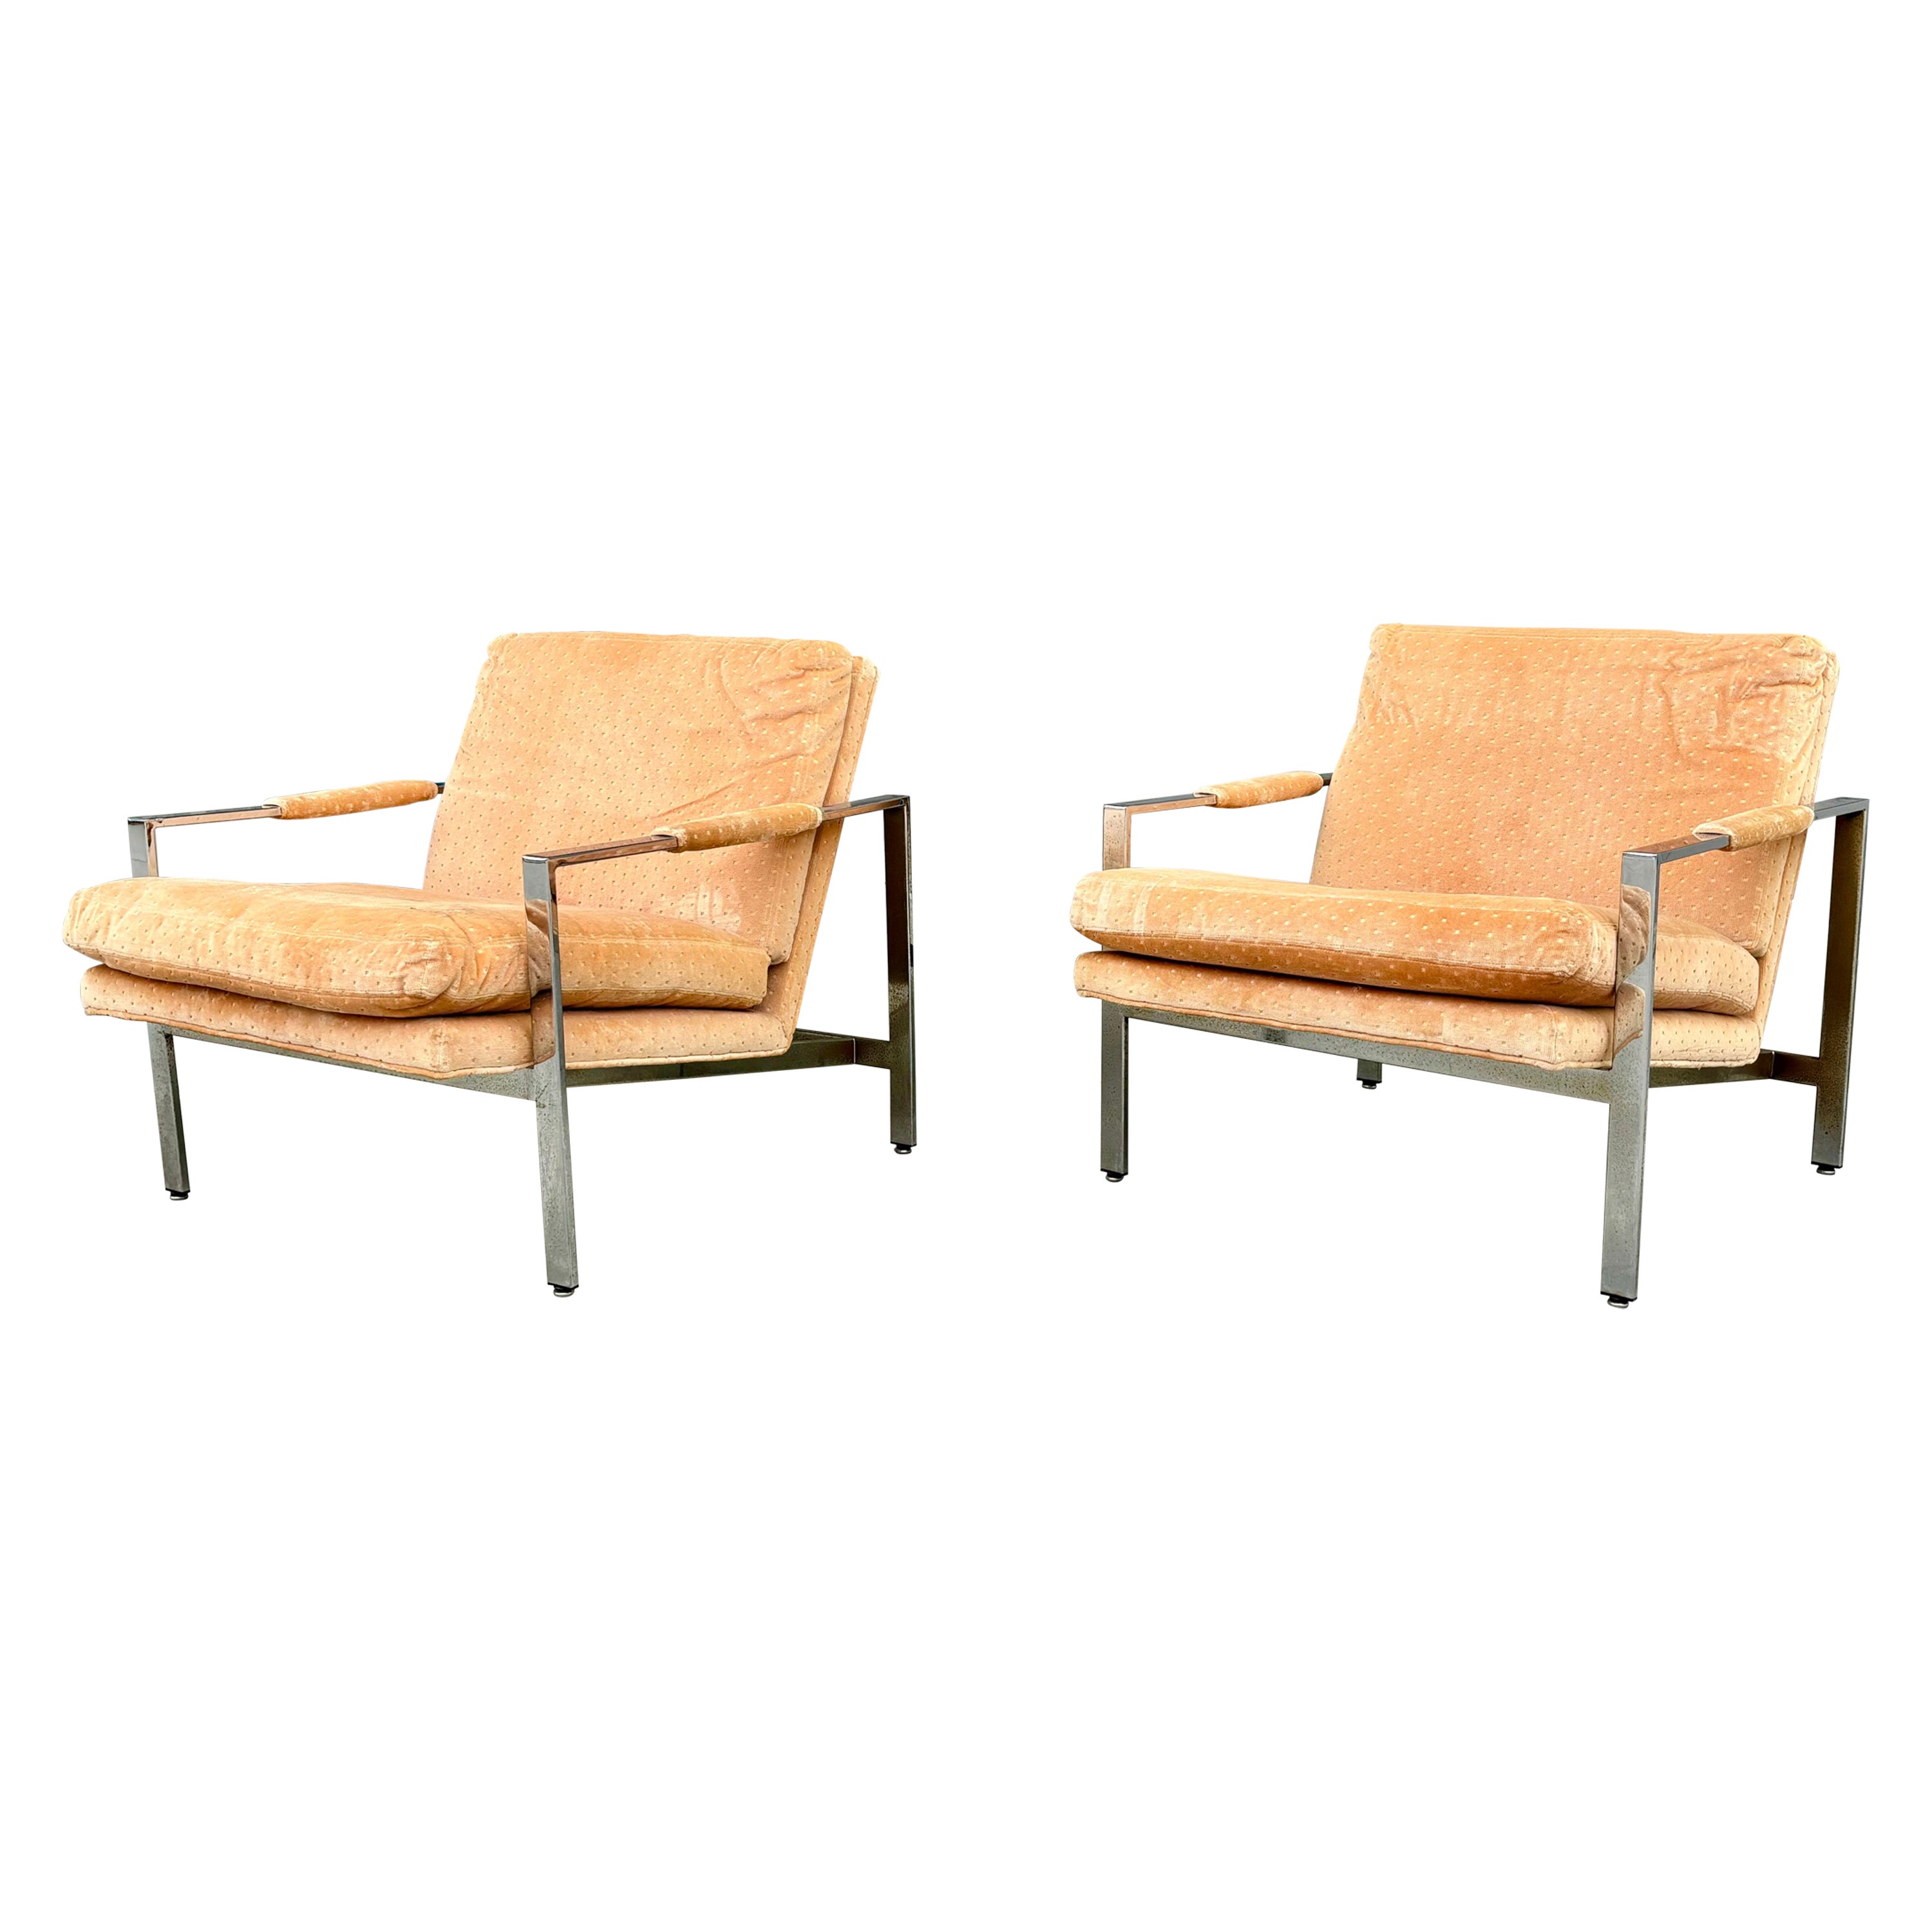 1970s Mid Century Chrome Lounge Chair by Milo Baughman for Thayer Coggin - Set o For Sale